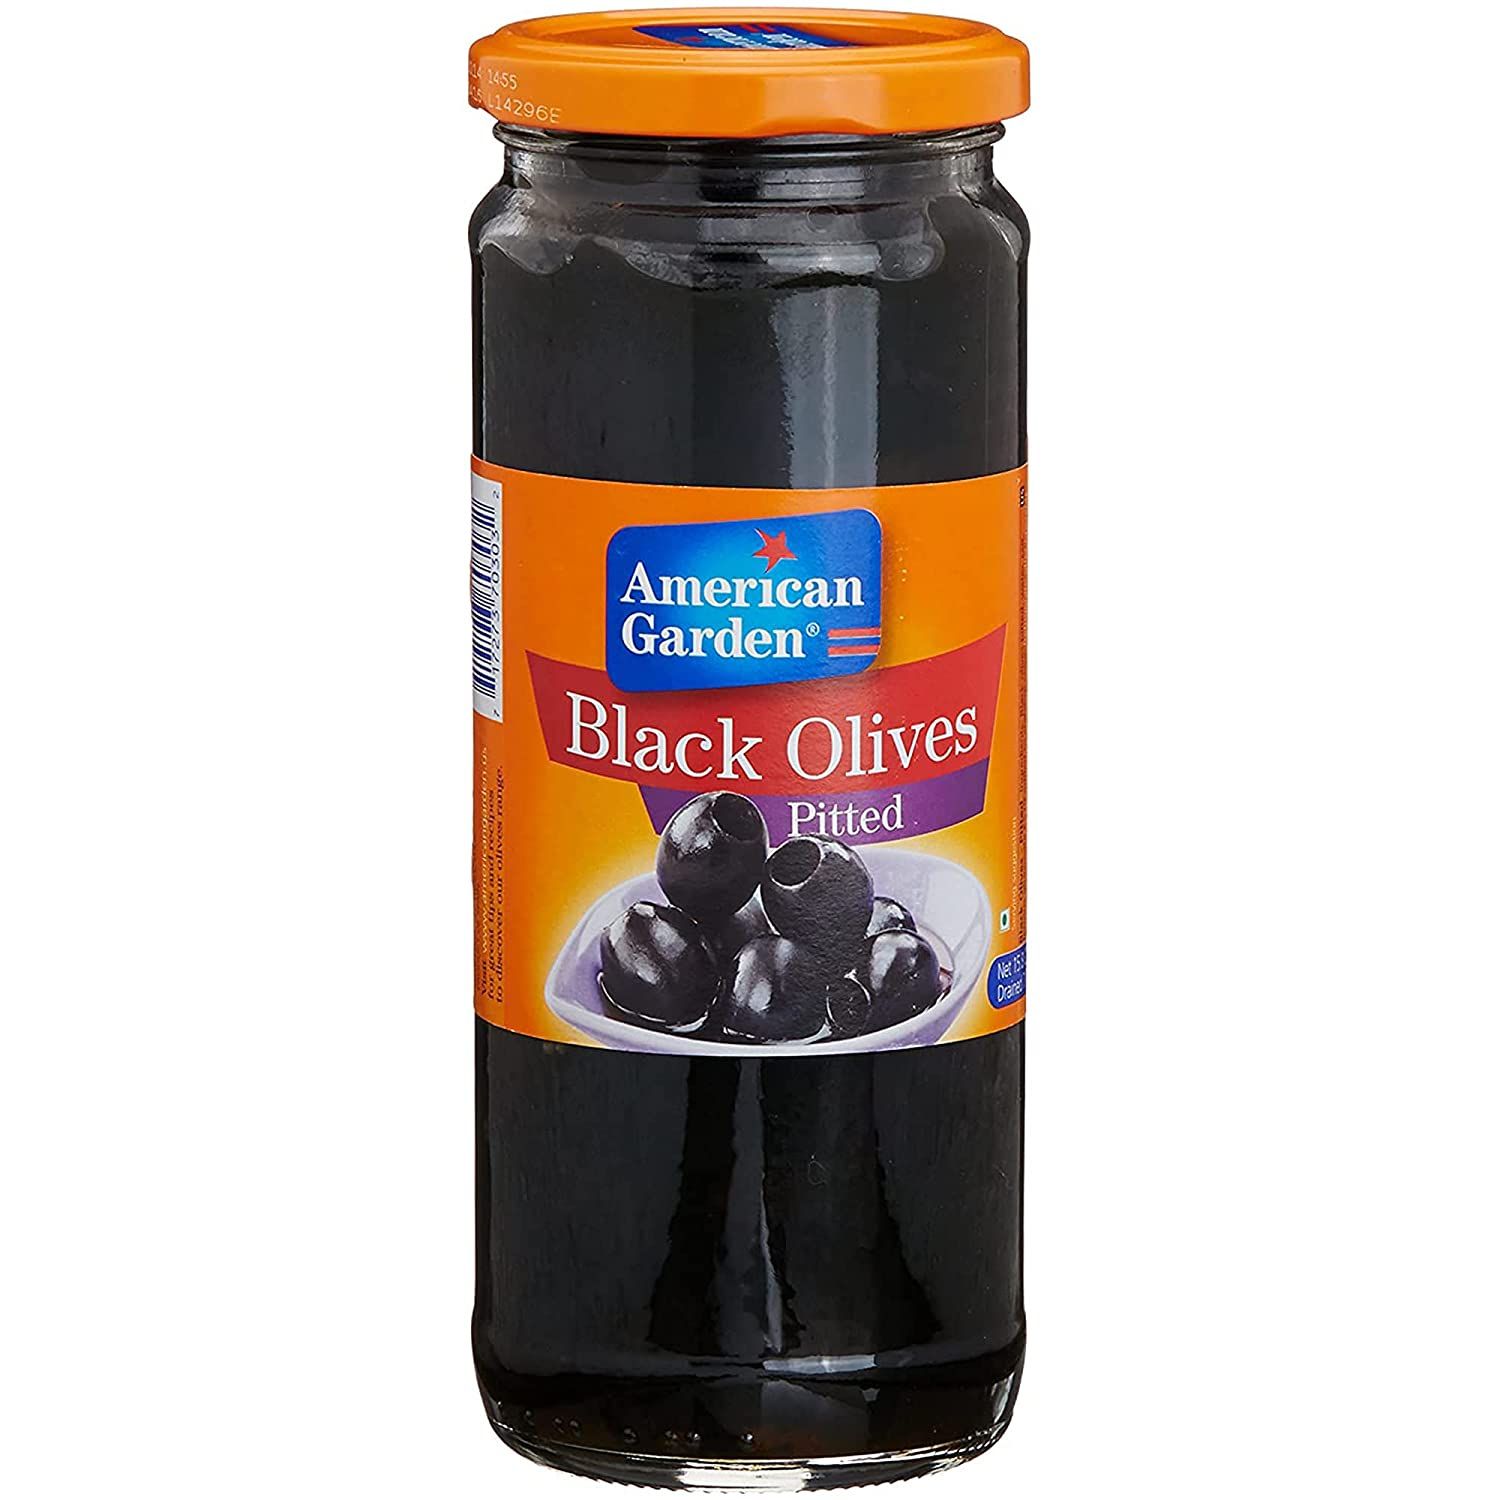 American Garden Black Olives Pitted Image